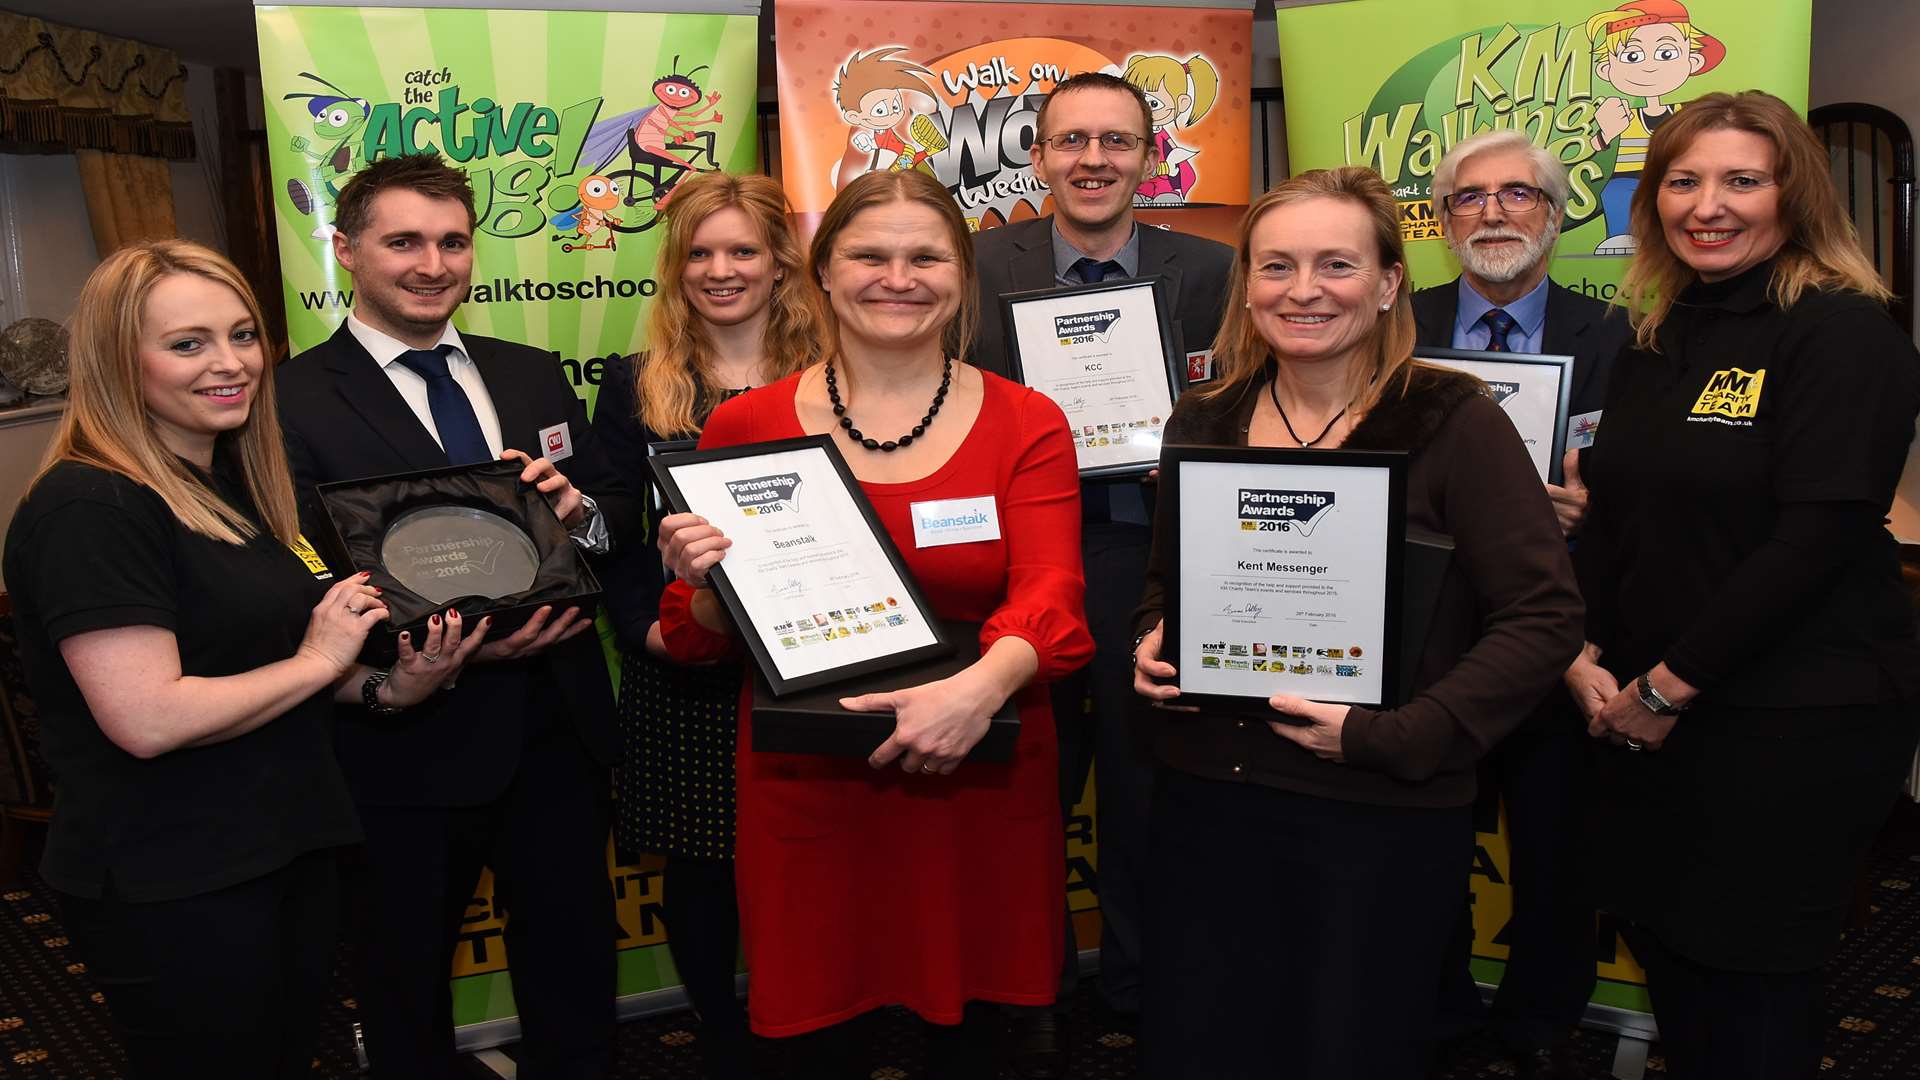 Representatives from Beanstalk, Clarkson Wright and Jakes, KCC, Kent Messenger and Corn Wallis East Kent Freemasons were thanked at the KM Partnership Awards for supporting the KM Charity Team's literacy work.